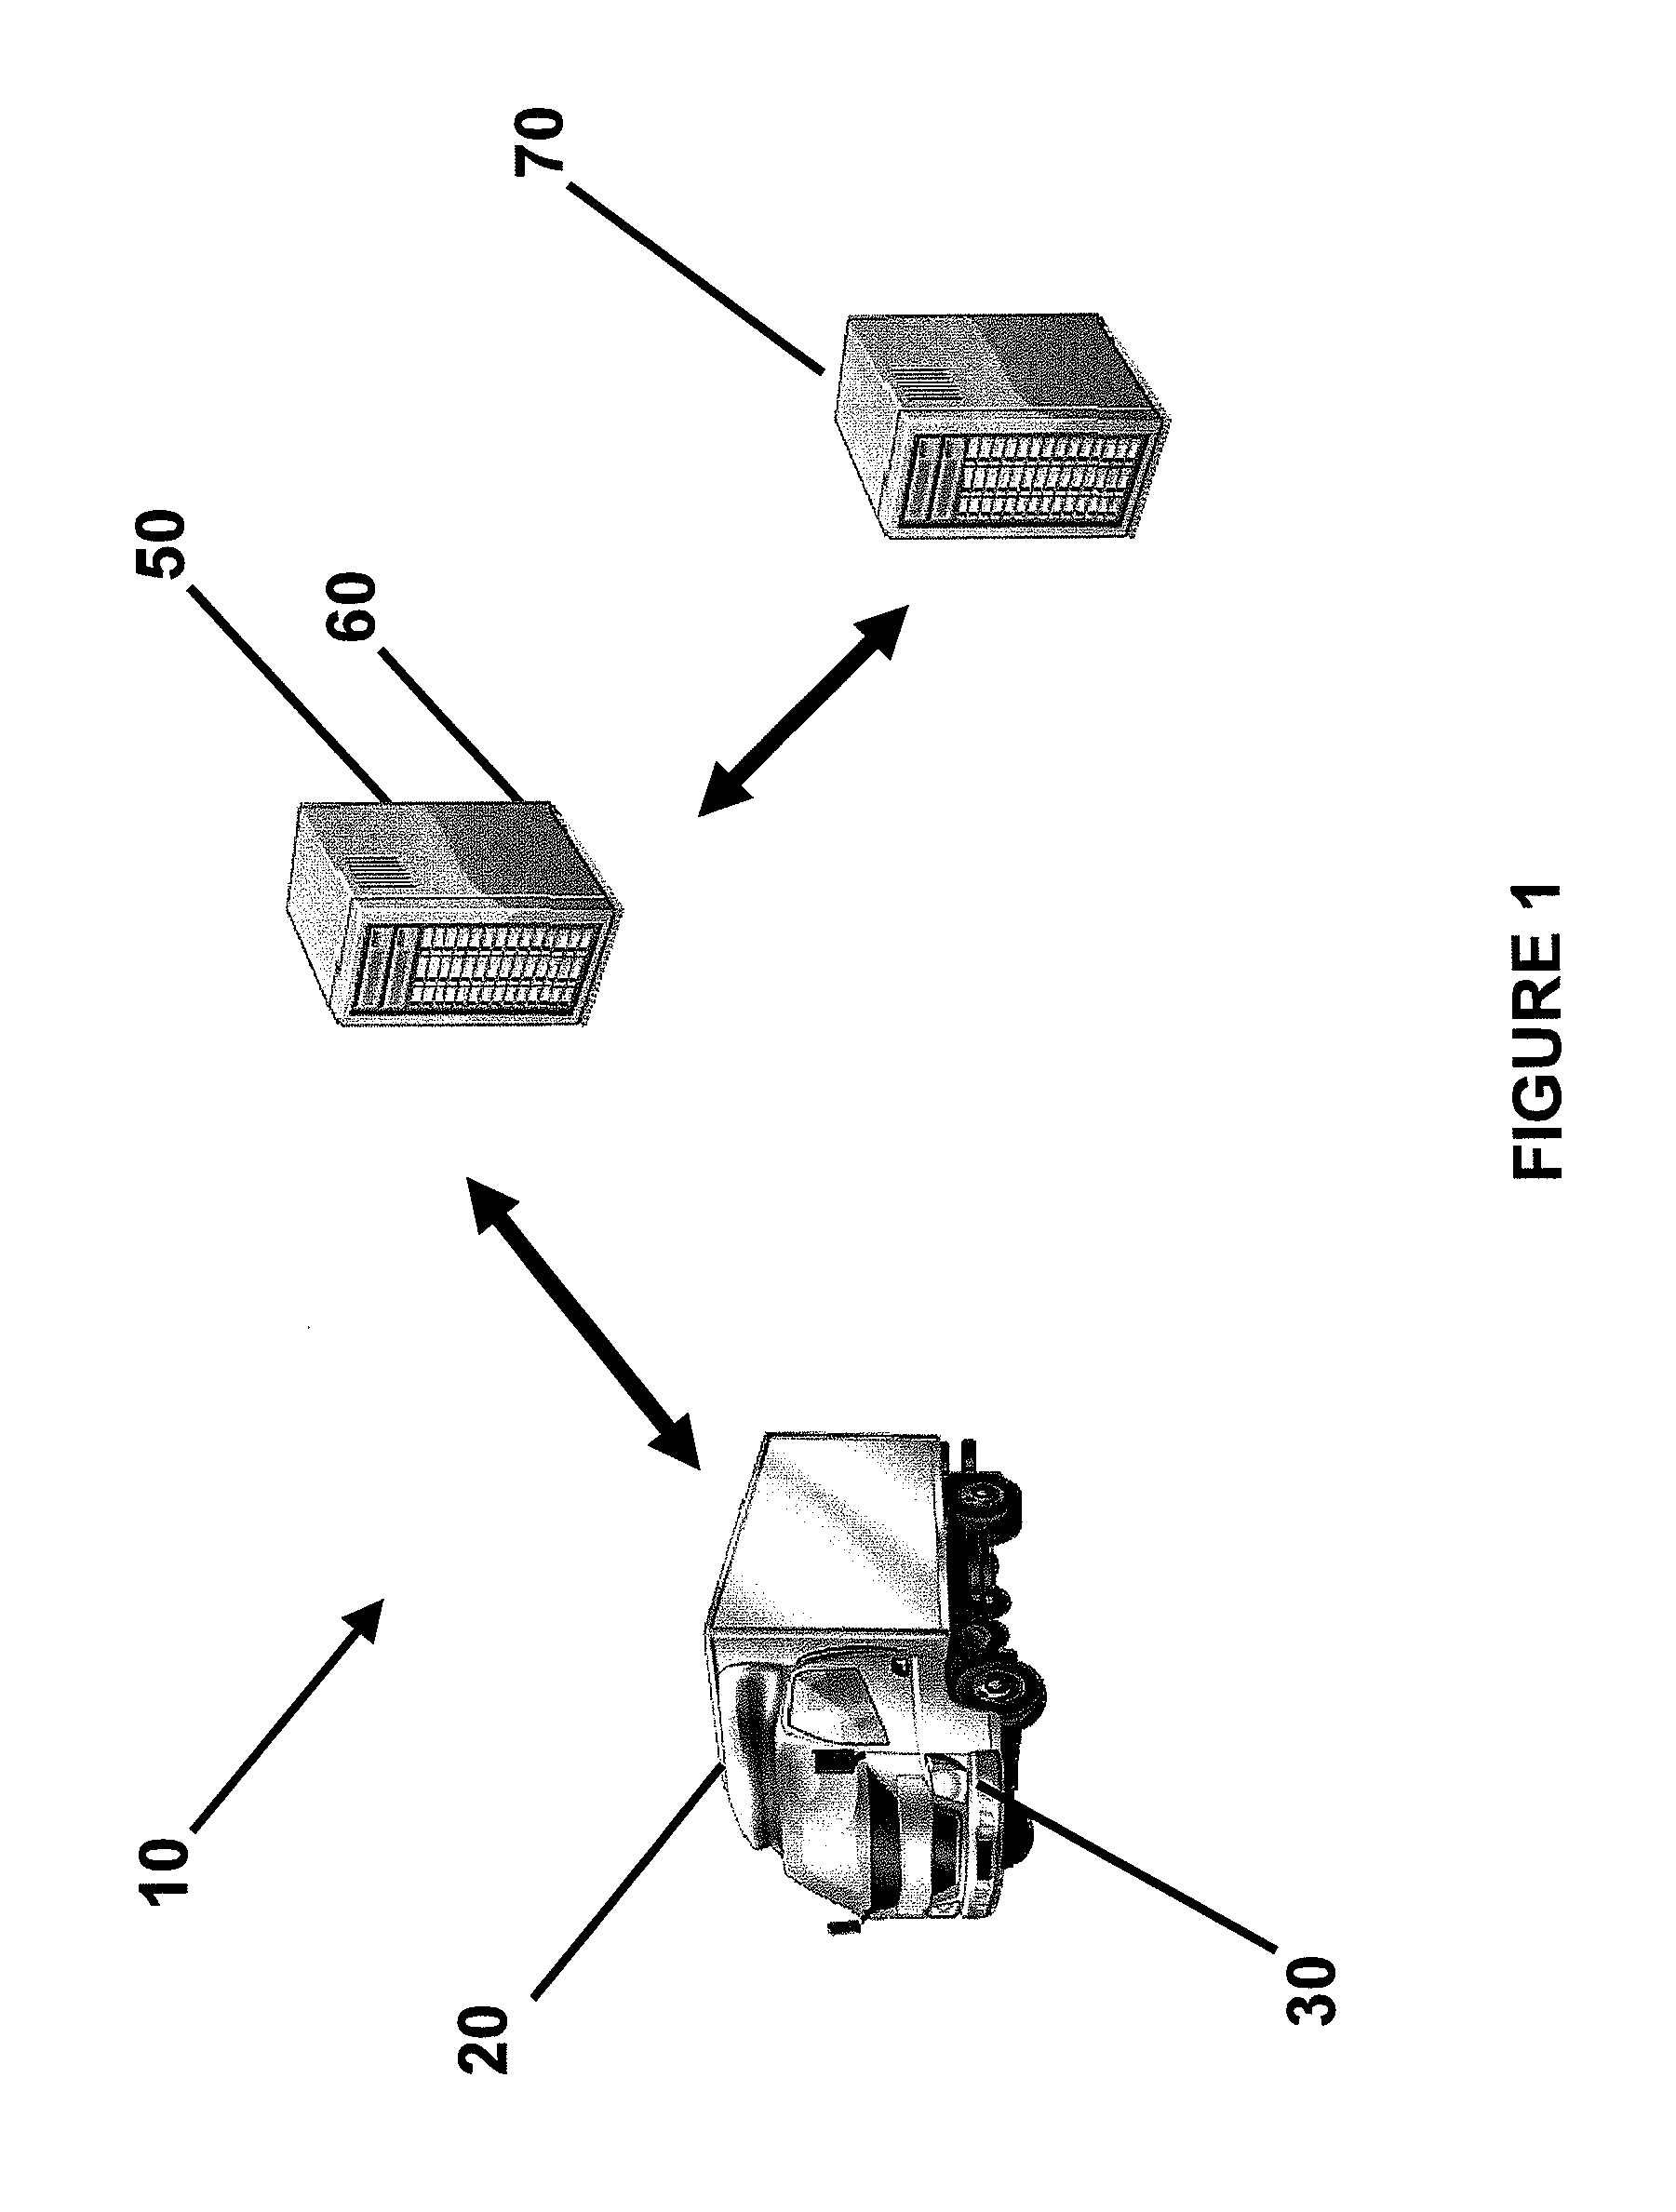 Maintenance system and method for vehicle fleets